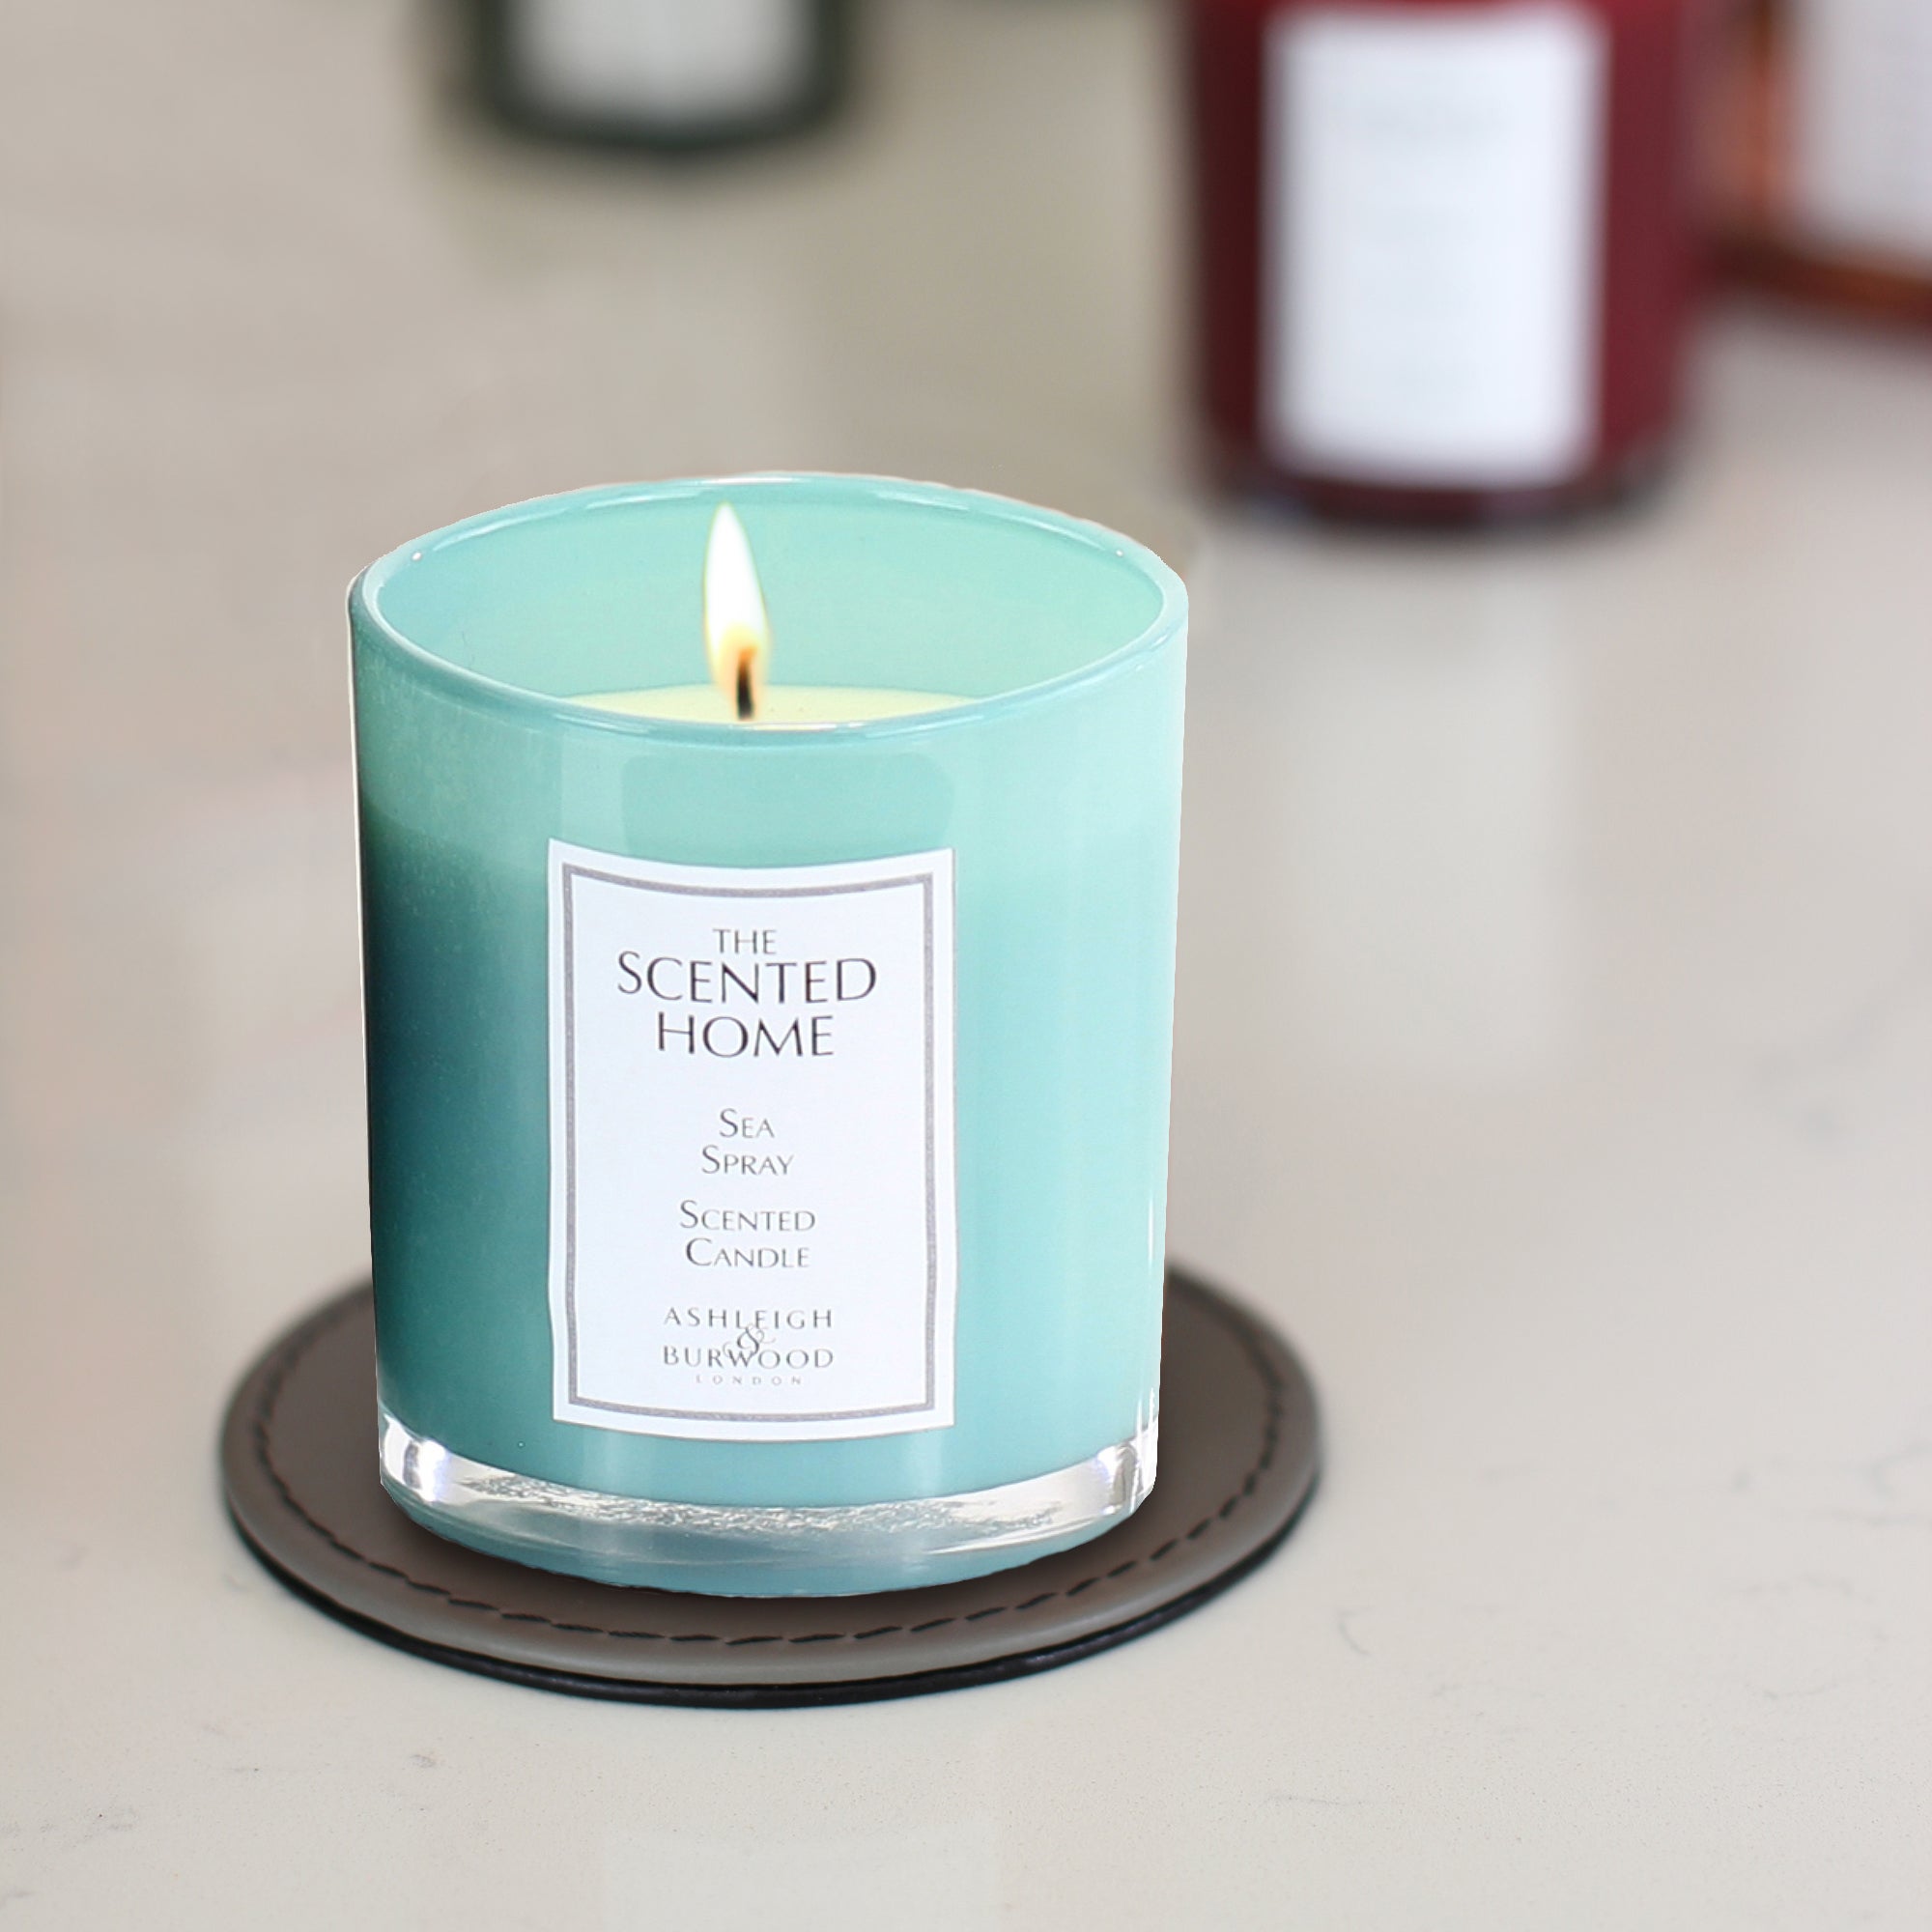 The Scented Home Sea Spray Candle